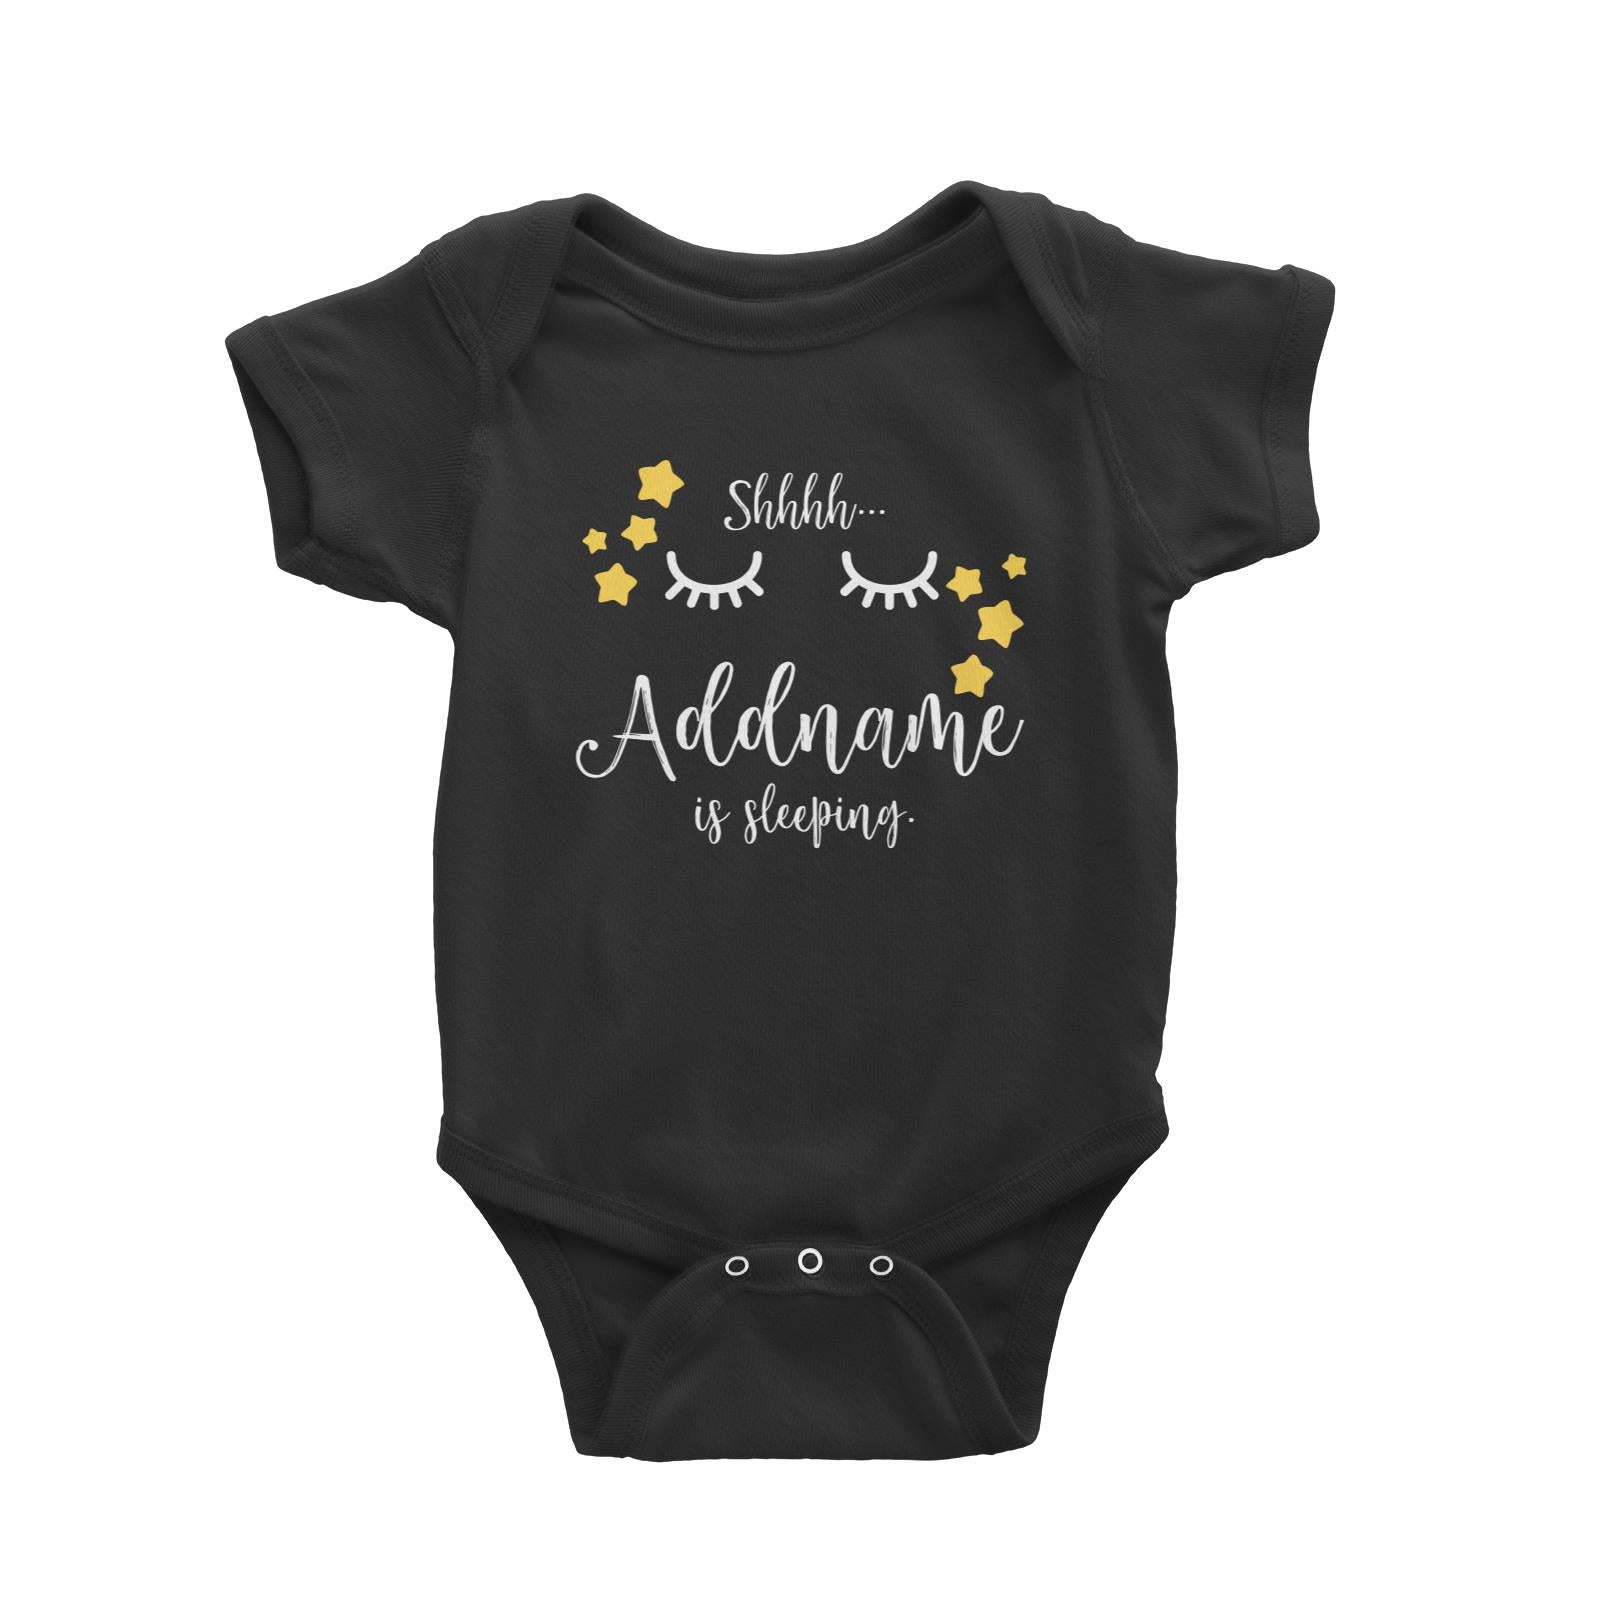 Shhh Addname is Sleeping with Stars Baby Romper